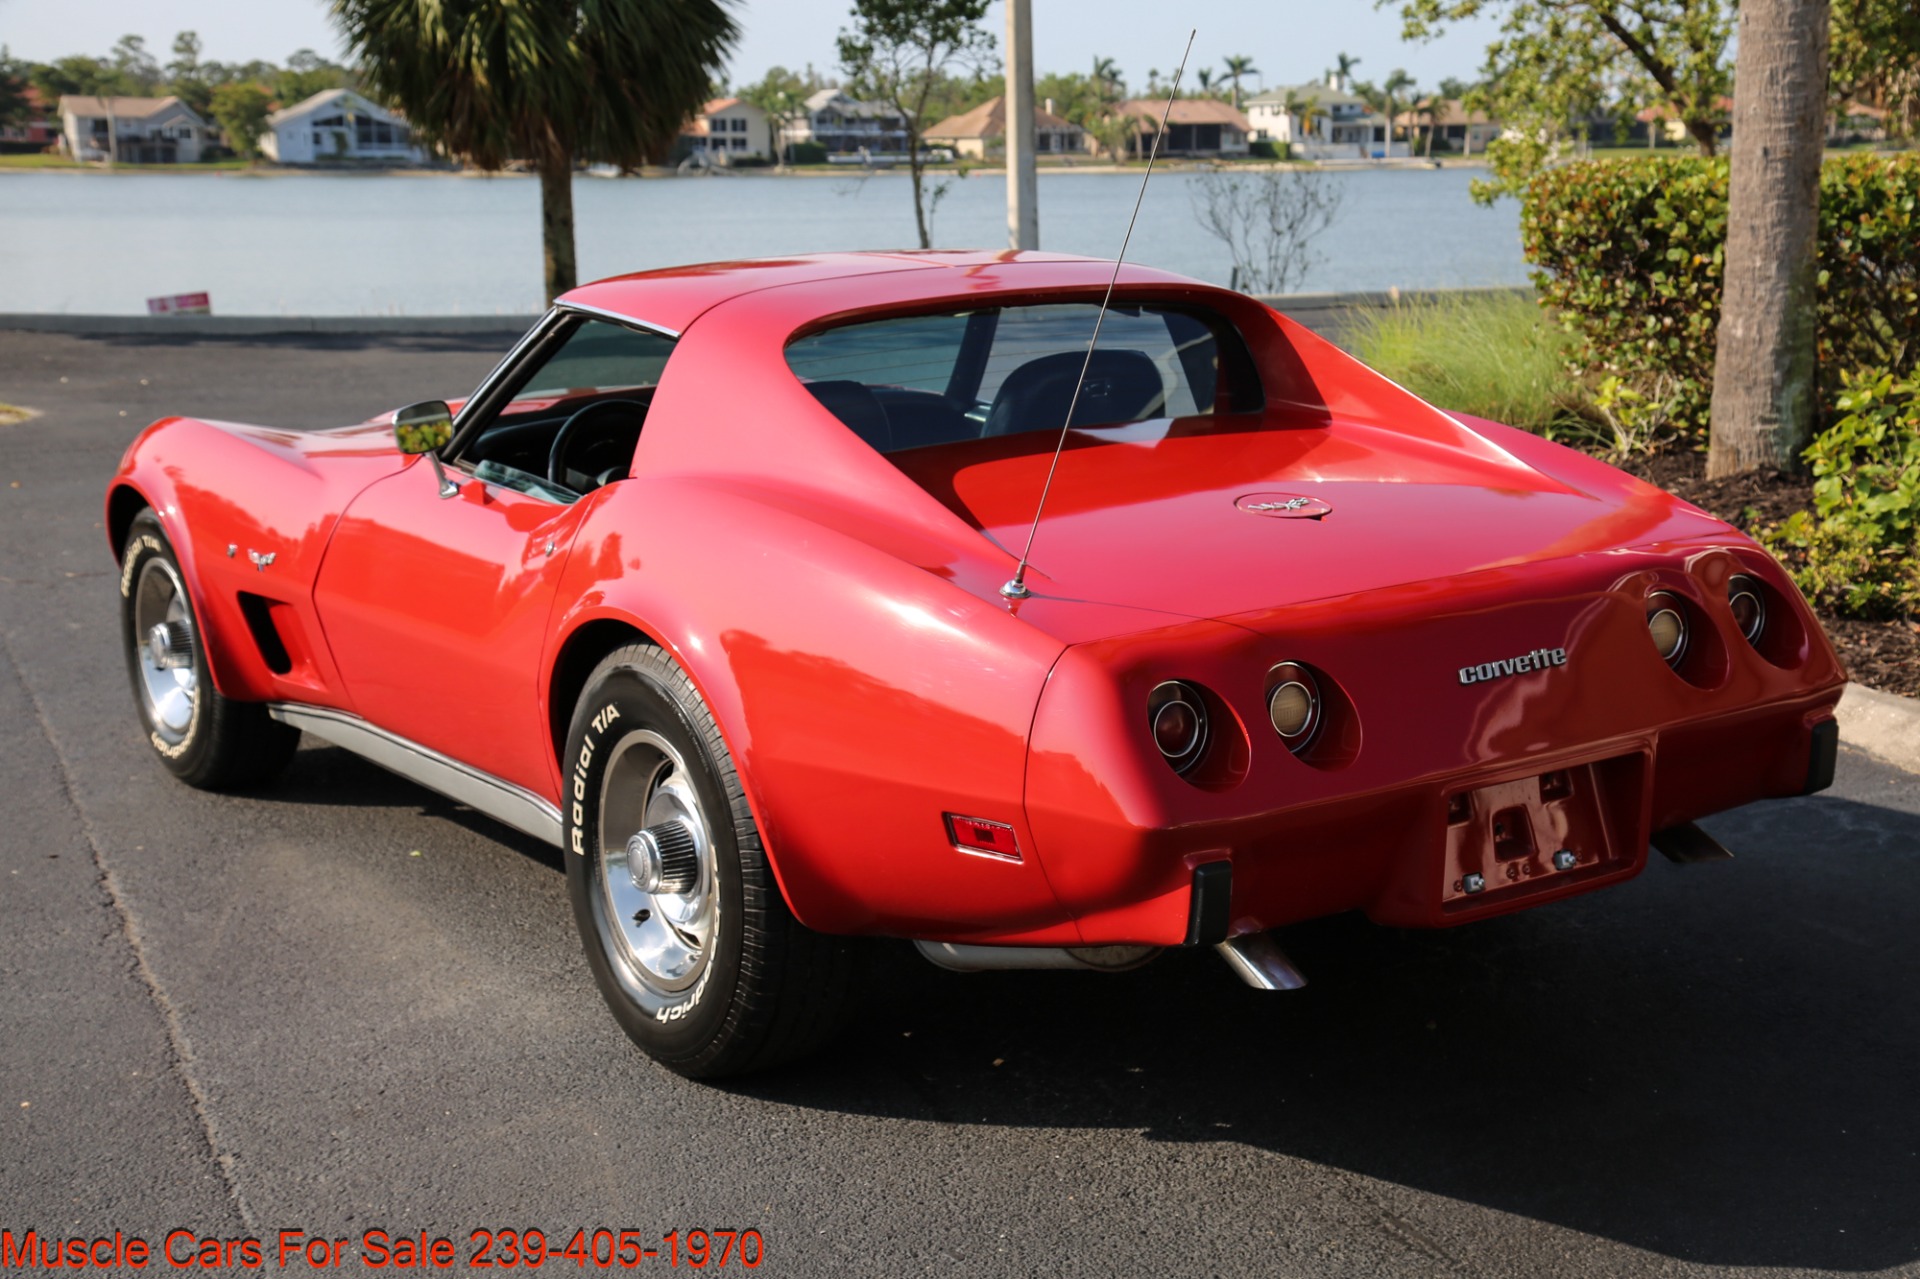 Used 1977 Chevrolet Corvette V8 Auto for sale $16,500 at Muscle Cars for Sale Inc. in Fort Myers FL 33912 6